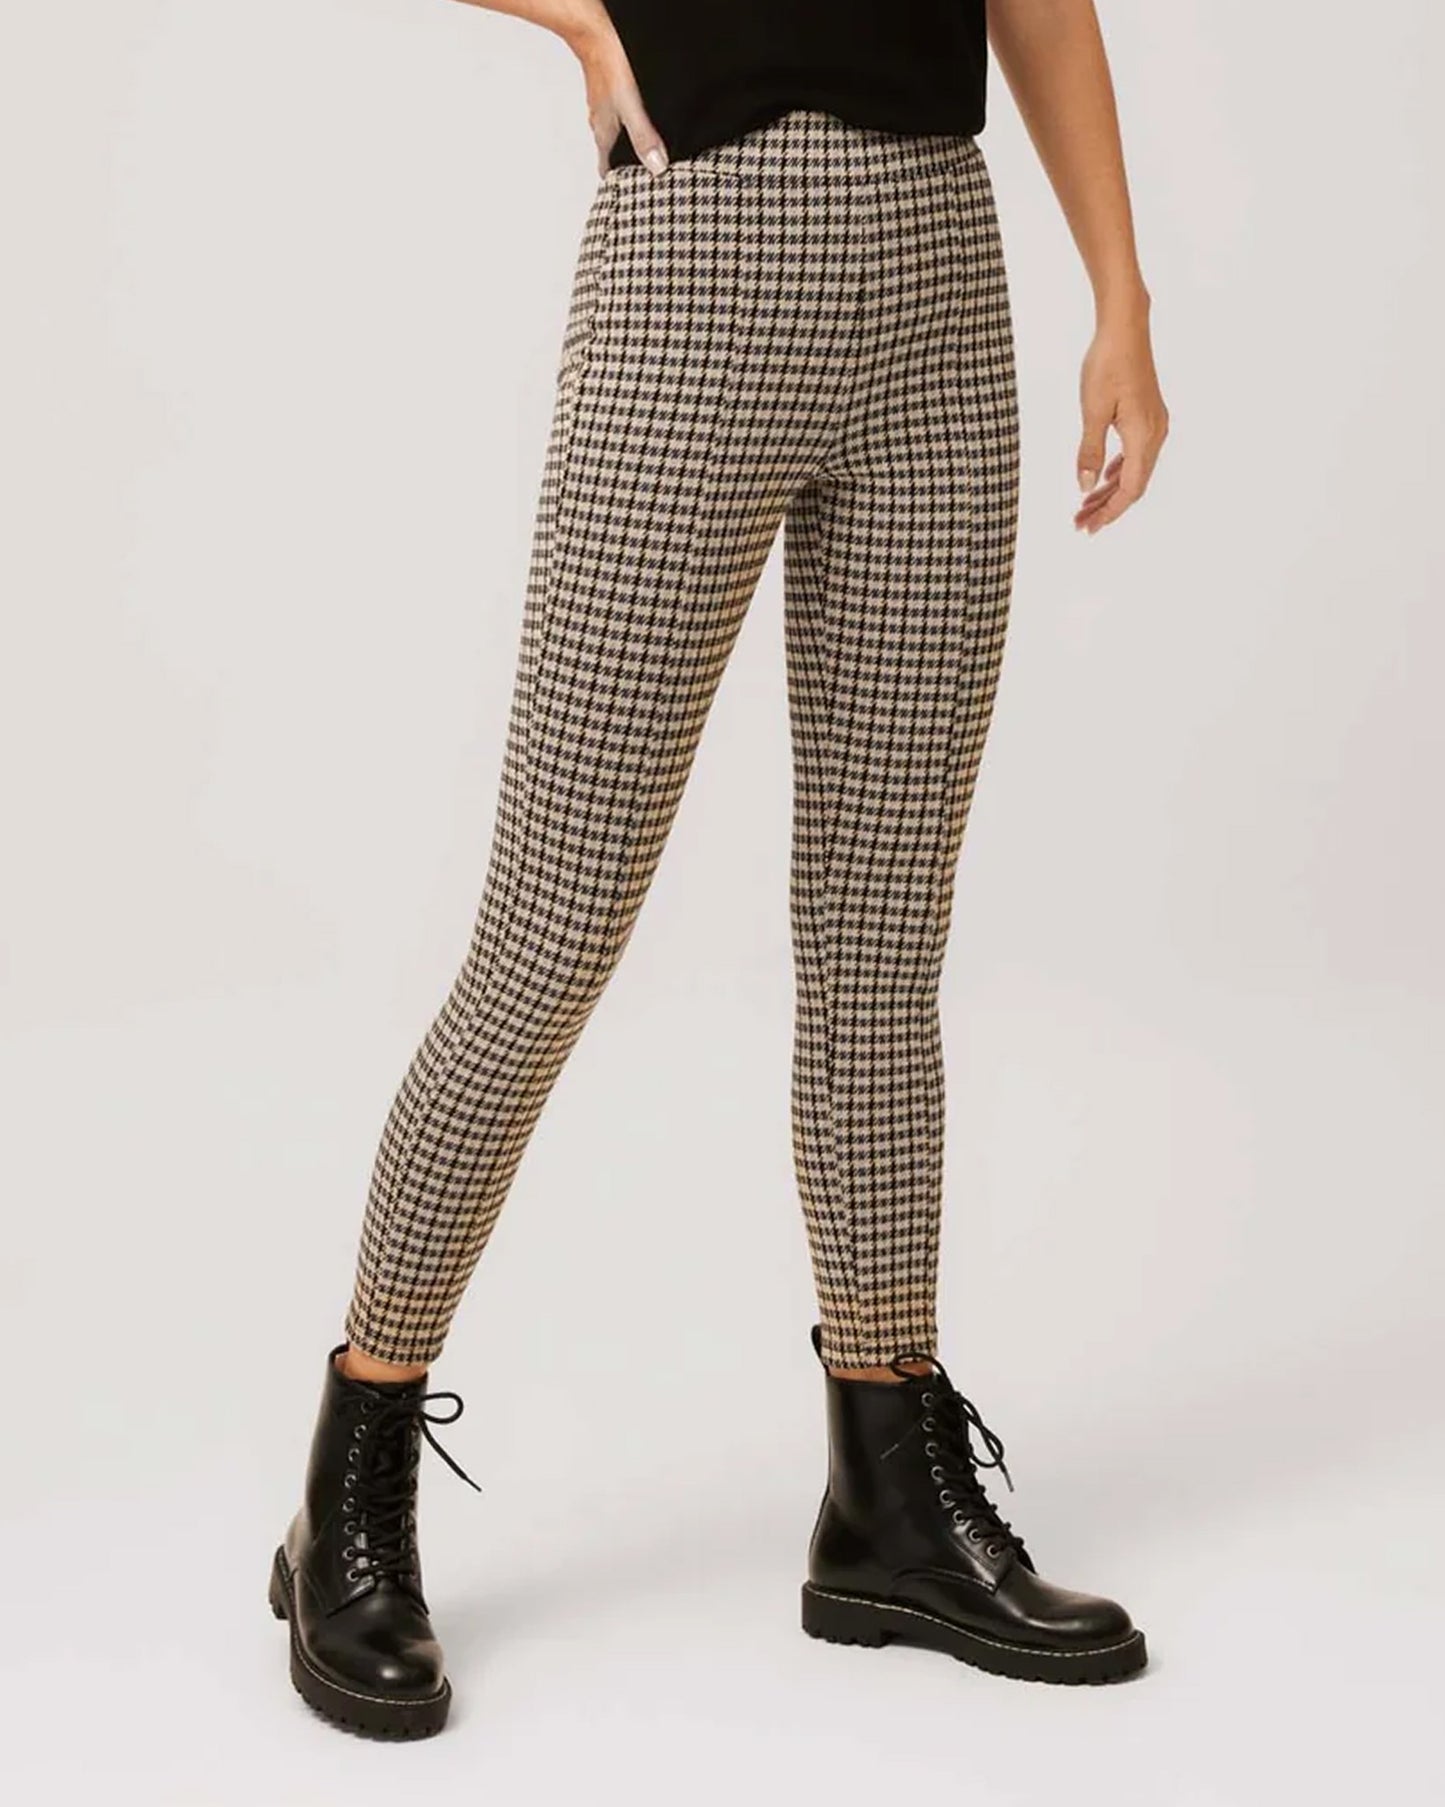 Ysabel Mora 70299 Check Leggings - High waisted light beige trouser leggings (treggings) with a black and blue houndstooth style check and raised seam up the centre of the legs.